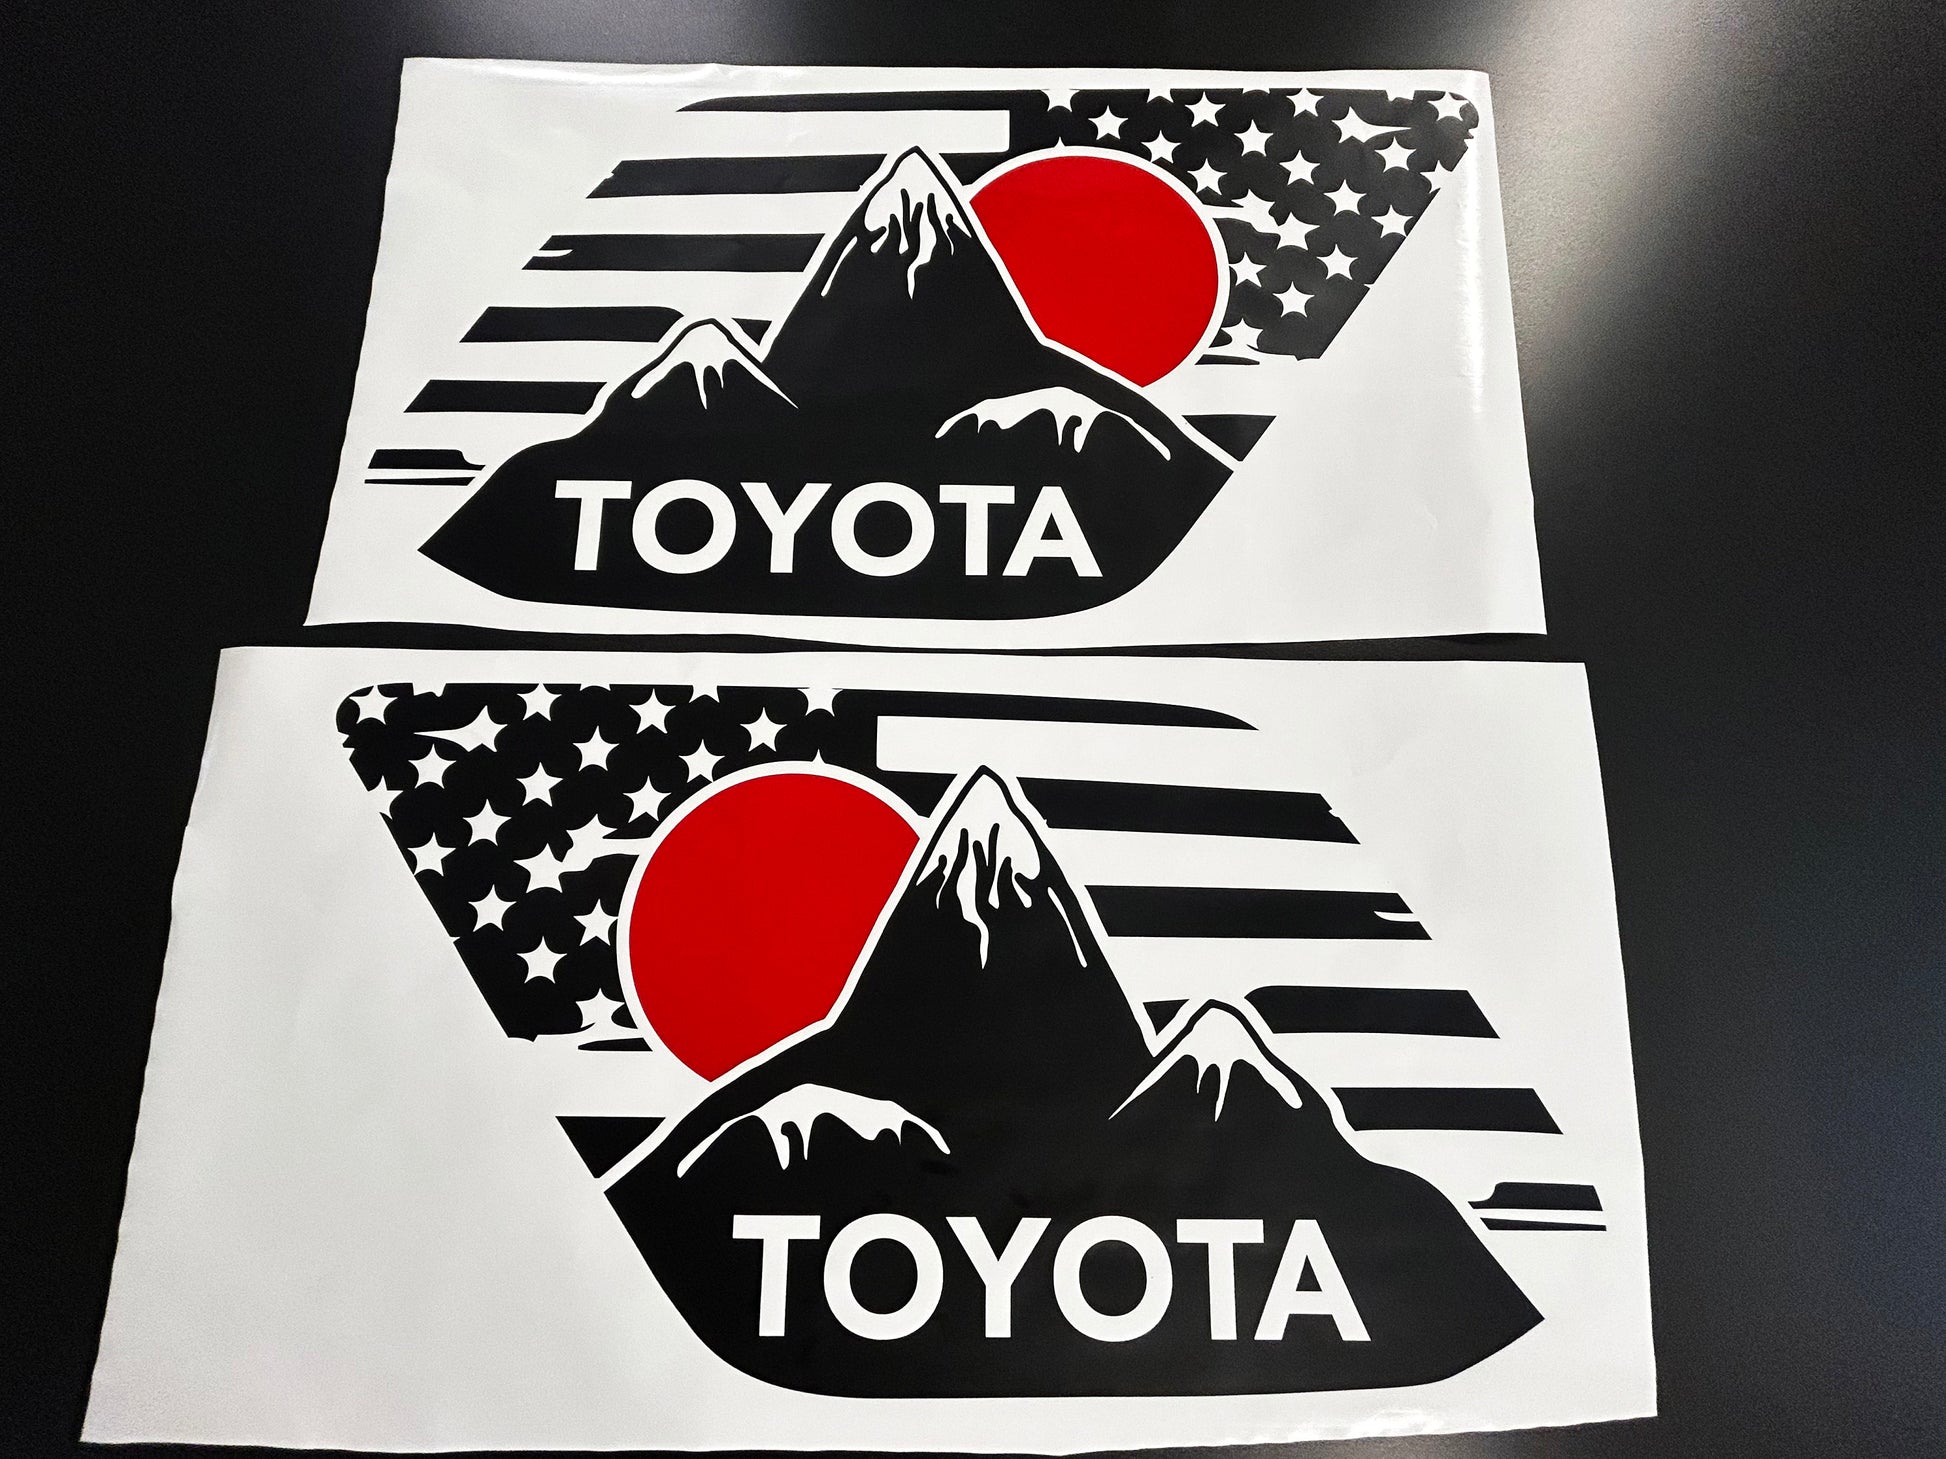 Toyota 4runner Window Decal - Mountains with Sun Landscape - Fits Toyota 4runner 5th generation - Set of 2